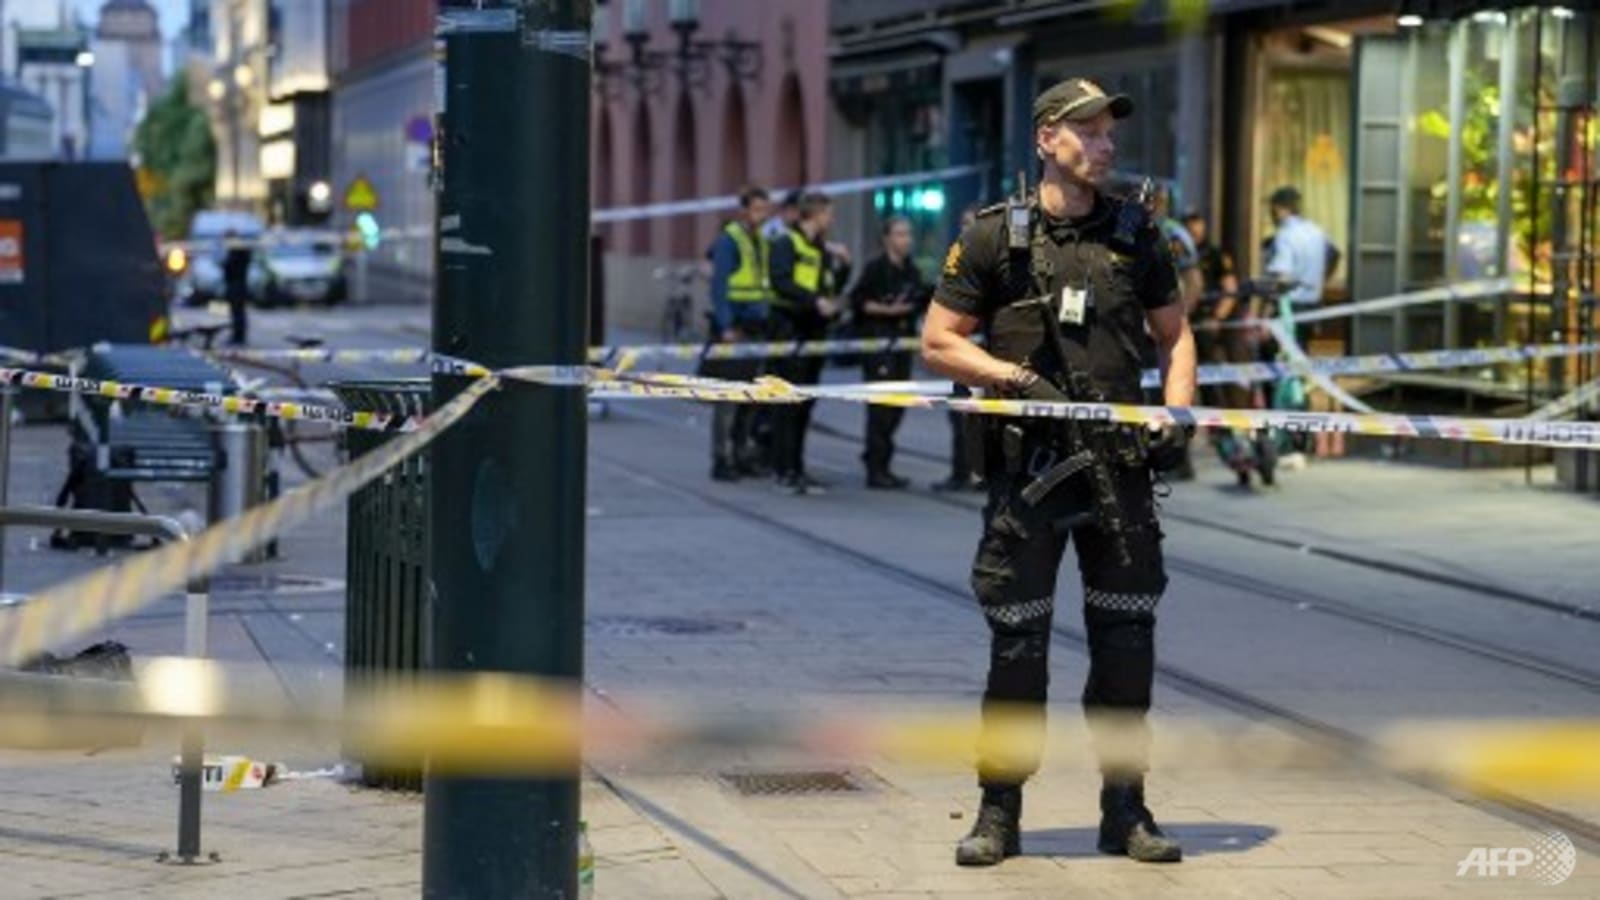 Two killed in Norway 'terror' shooting near bars, Pride parade called off on police advice